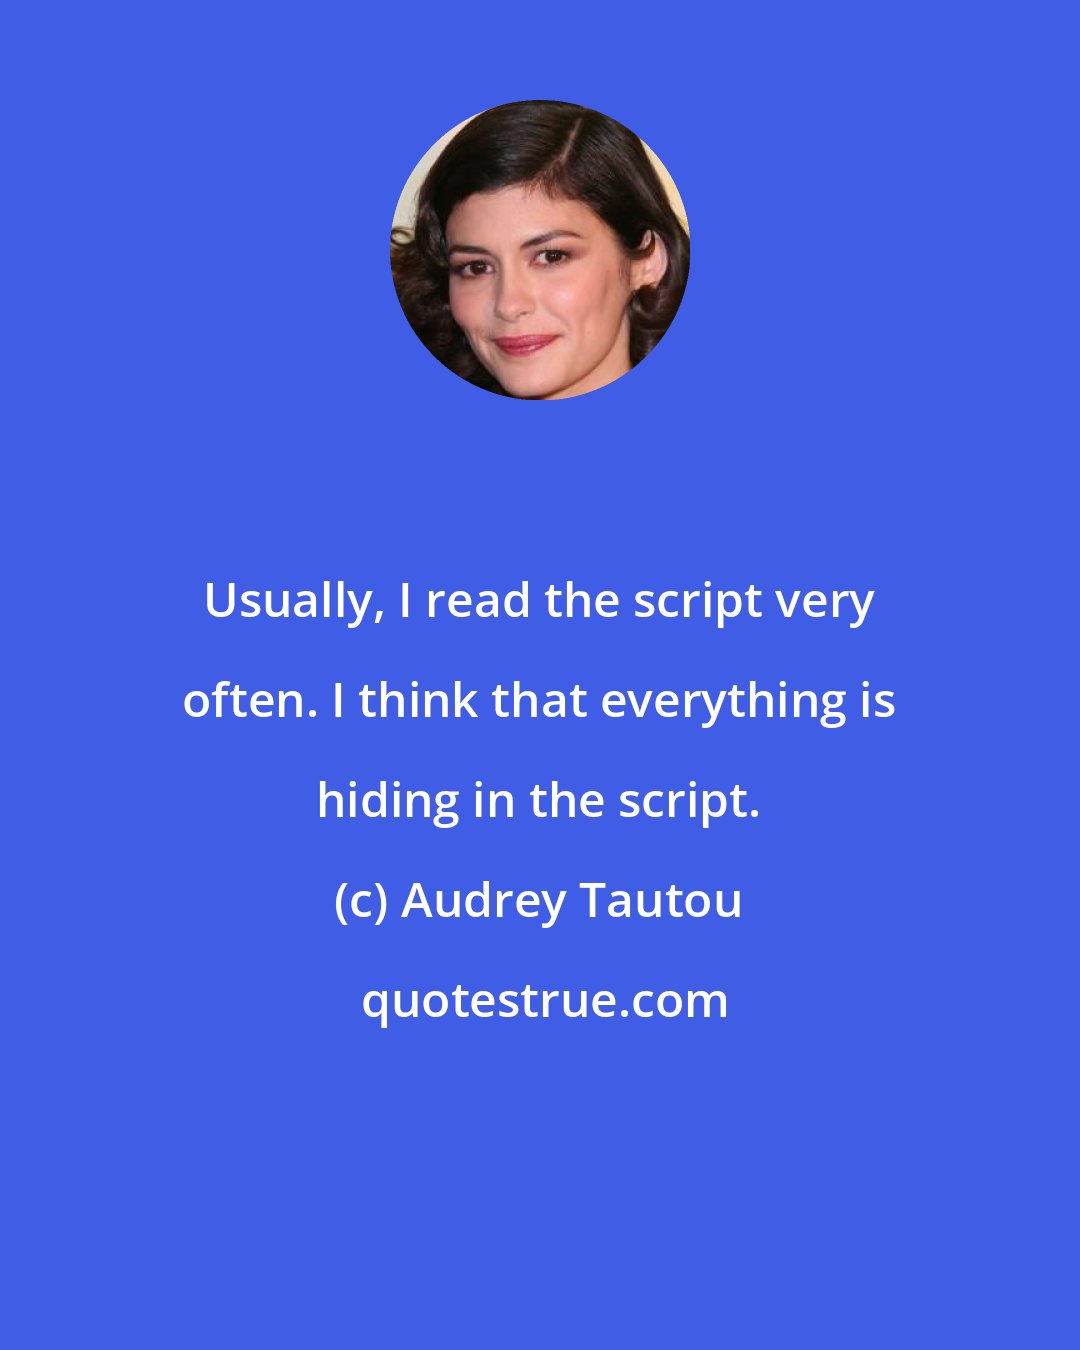 Audrey Tautou: Usually, I read the script very often. I think that everything is hiding in the script.